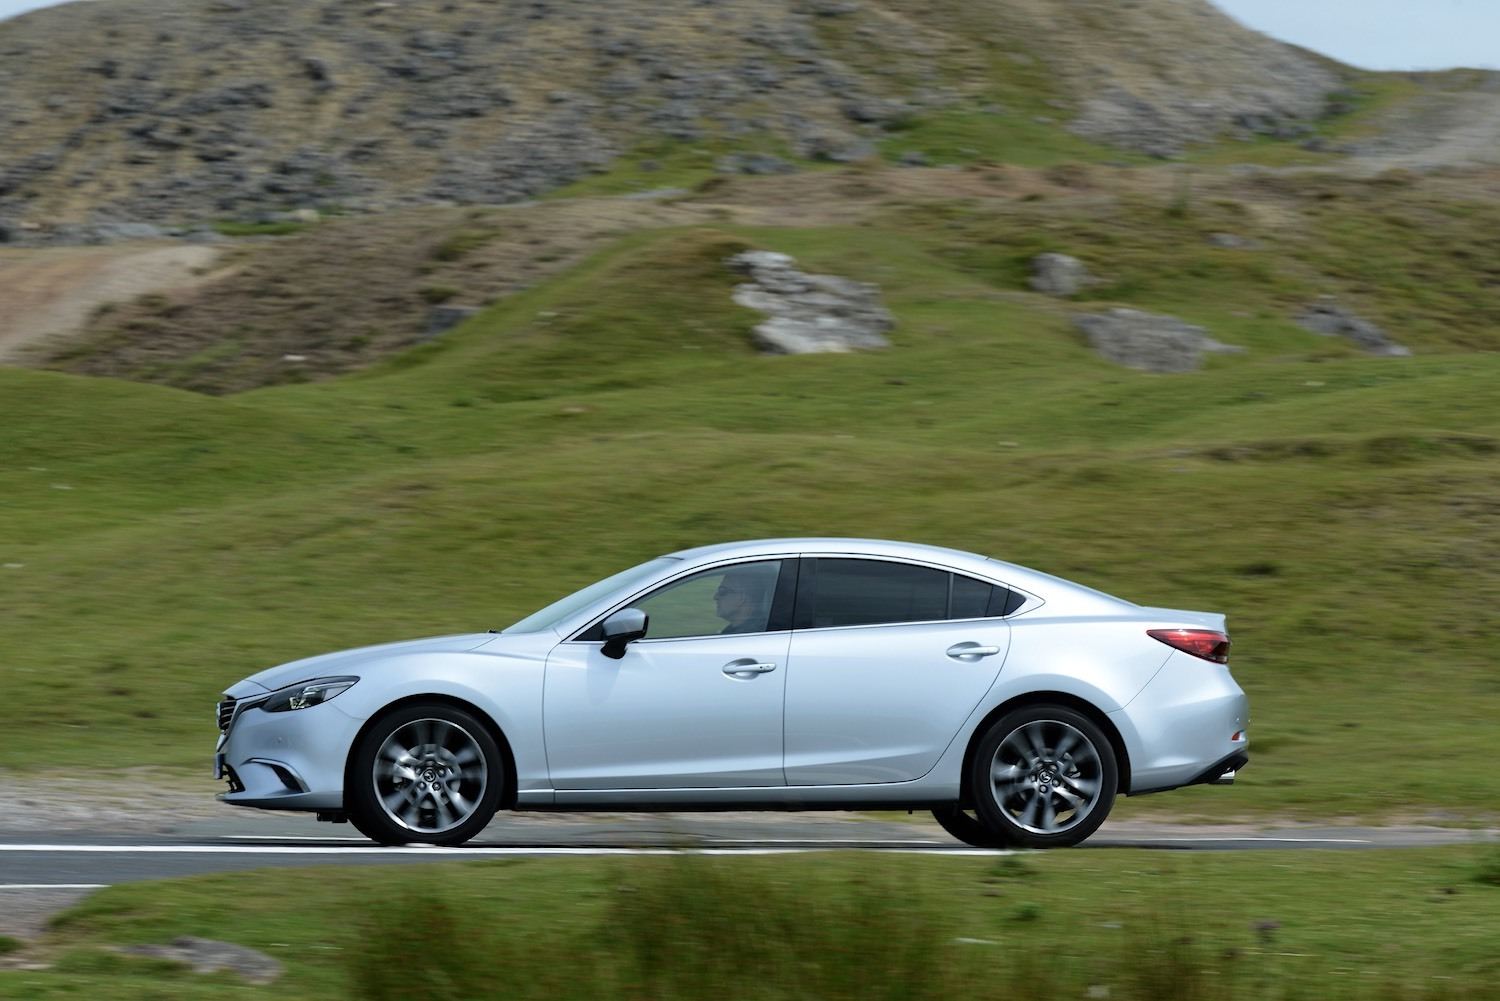 Tom Scanlan reviews the 2017 Mazda 6 Saloon for Drive 3